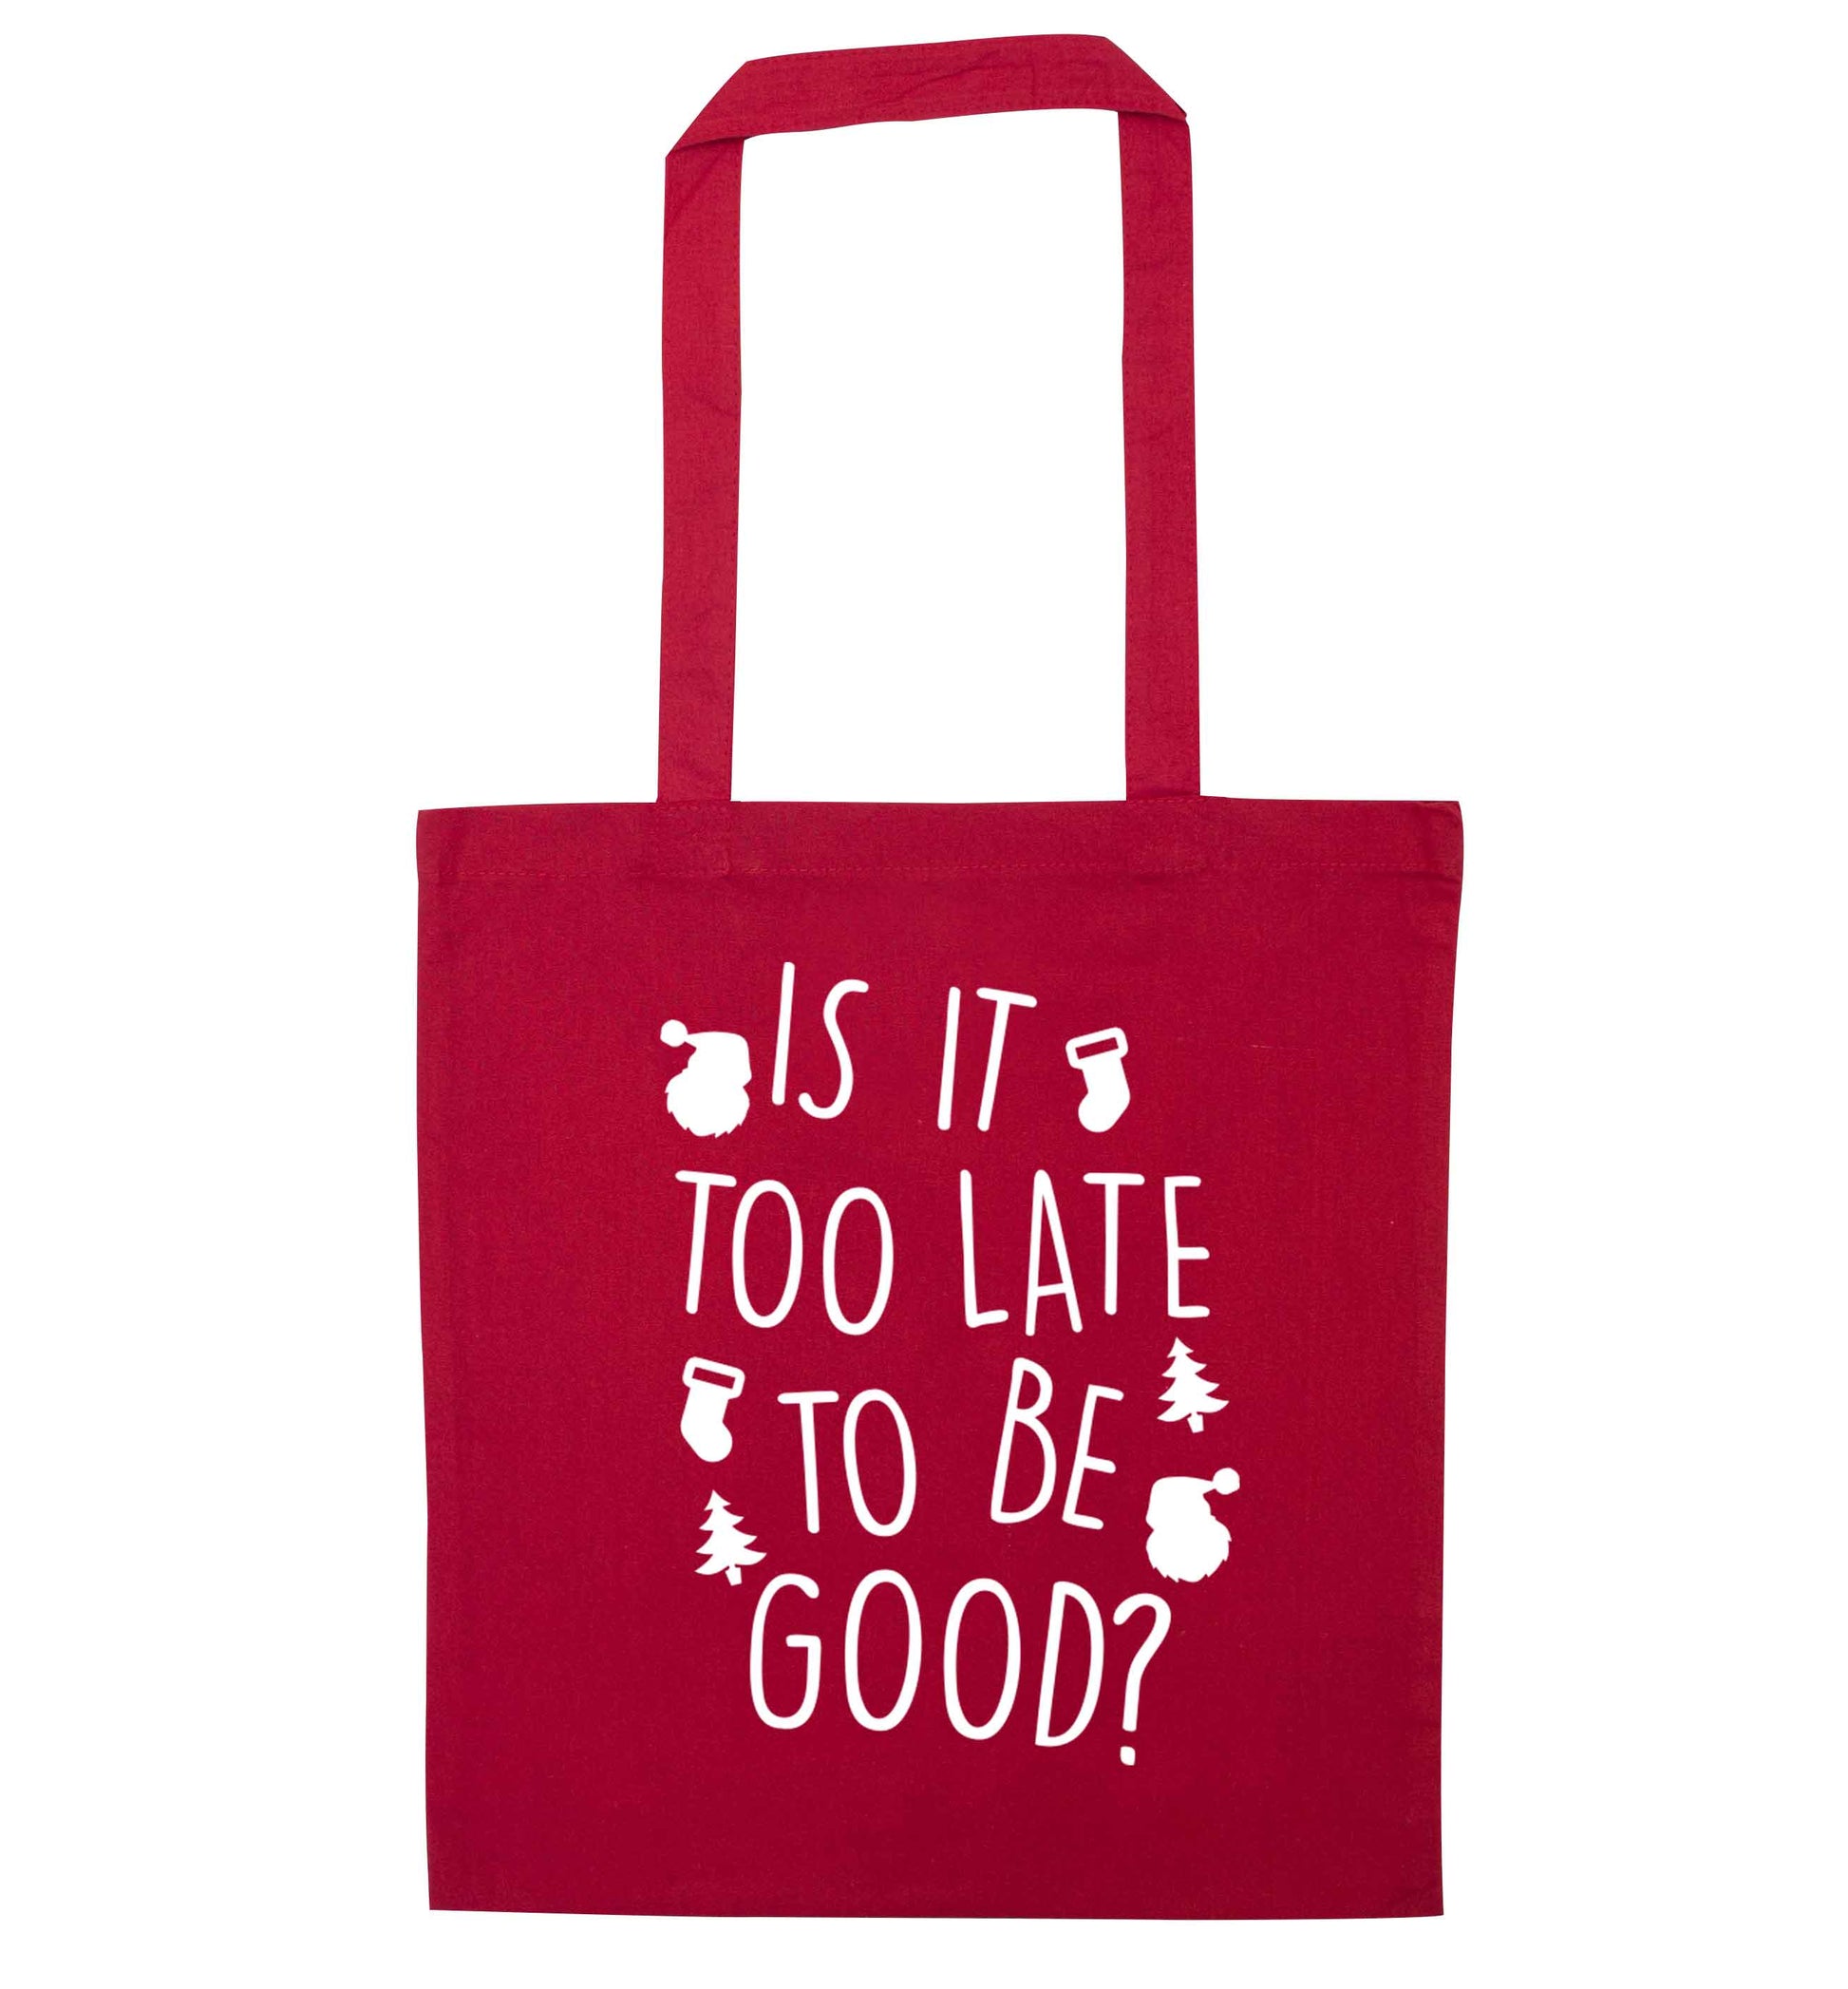 Too Late to be Good red tote bag